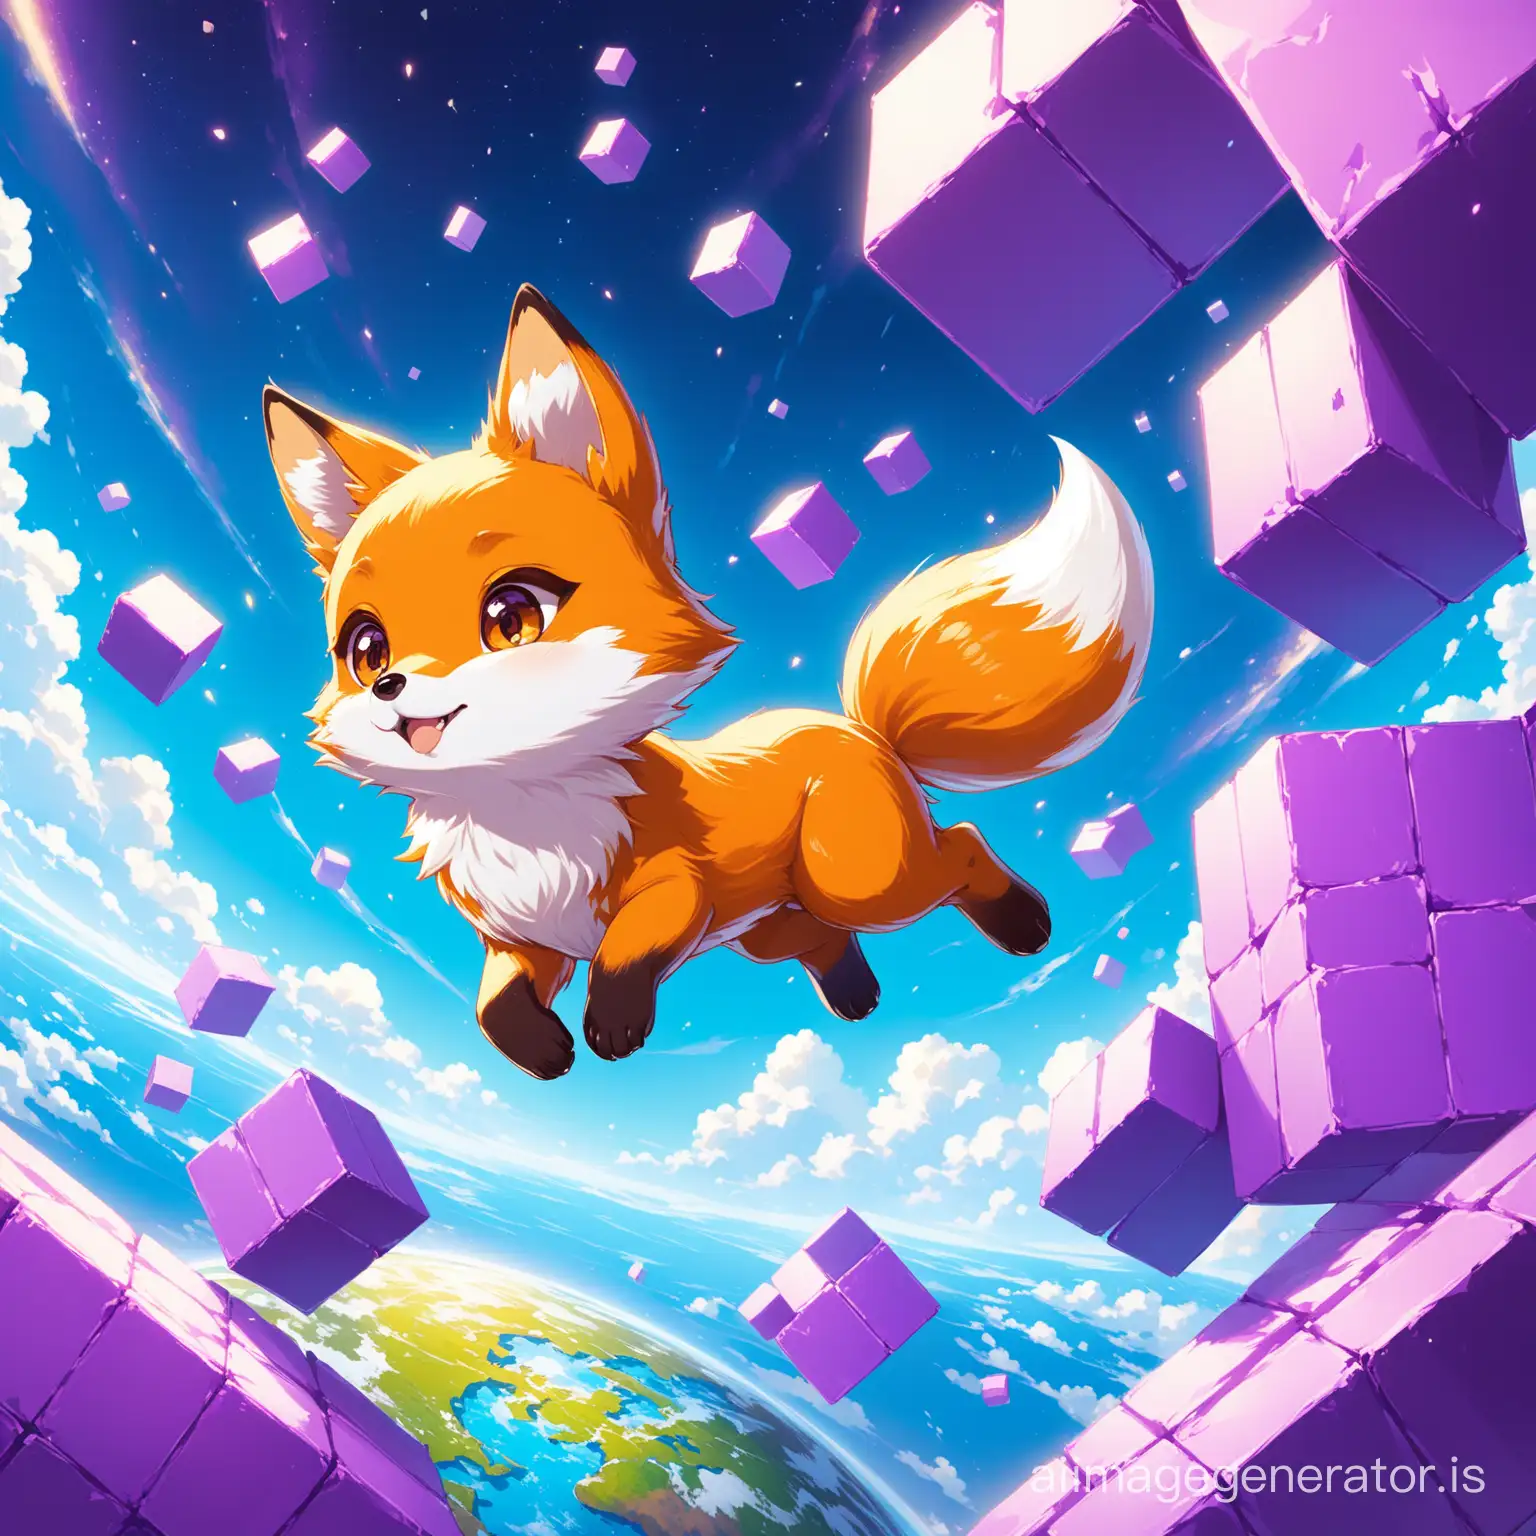 A little cute fox  flying on the earth with super detail and High Quality
big and Purple and floating blocks are seen everywhere
Details are evident beautifully and with great precision
